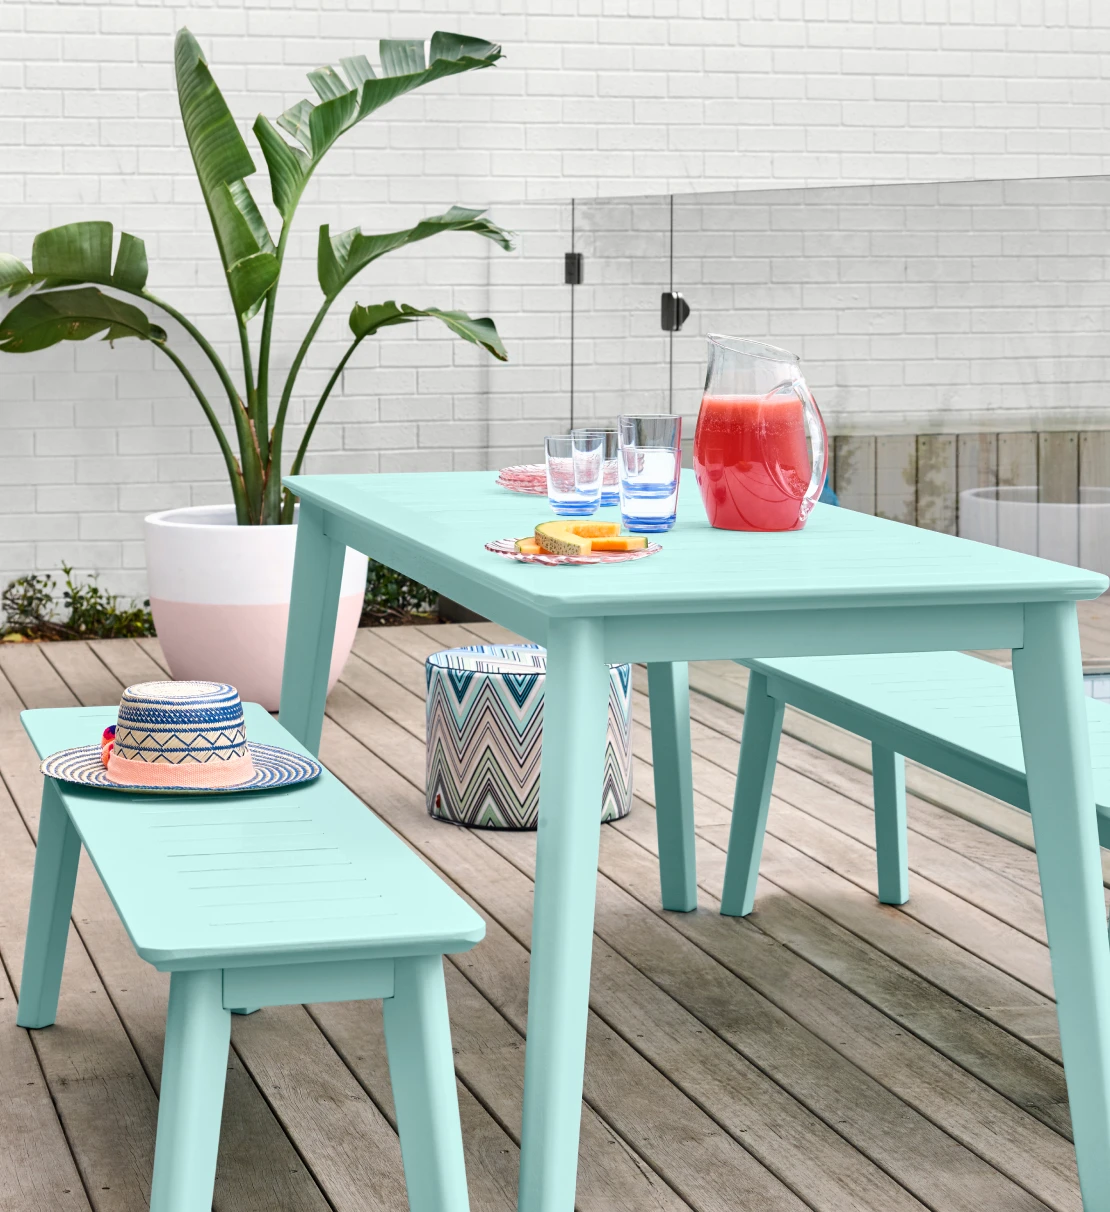 Outdoor entertaining area with Mint Twist coloured table and chairs on a deck in front of a pool fence and white brick wall.